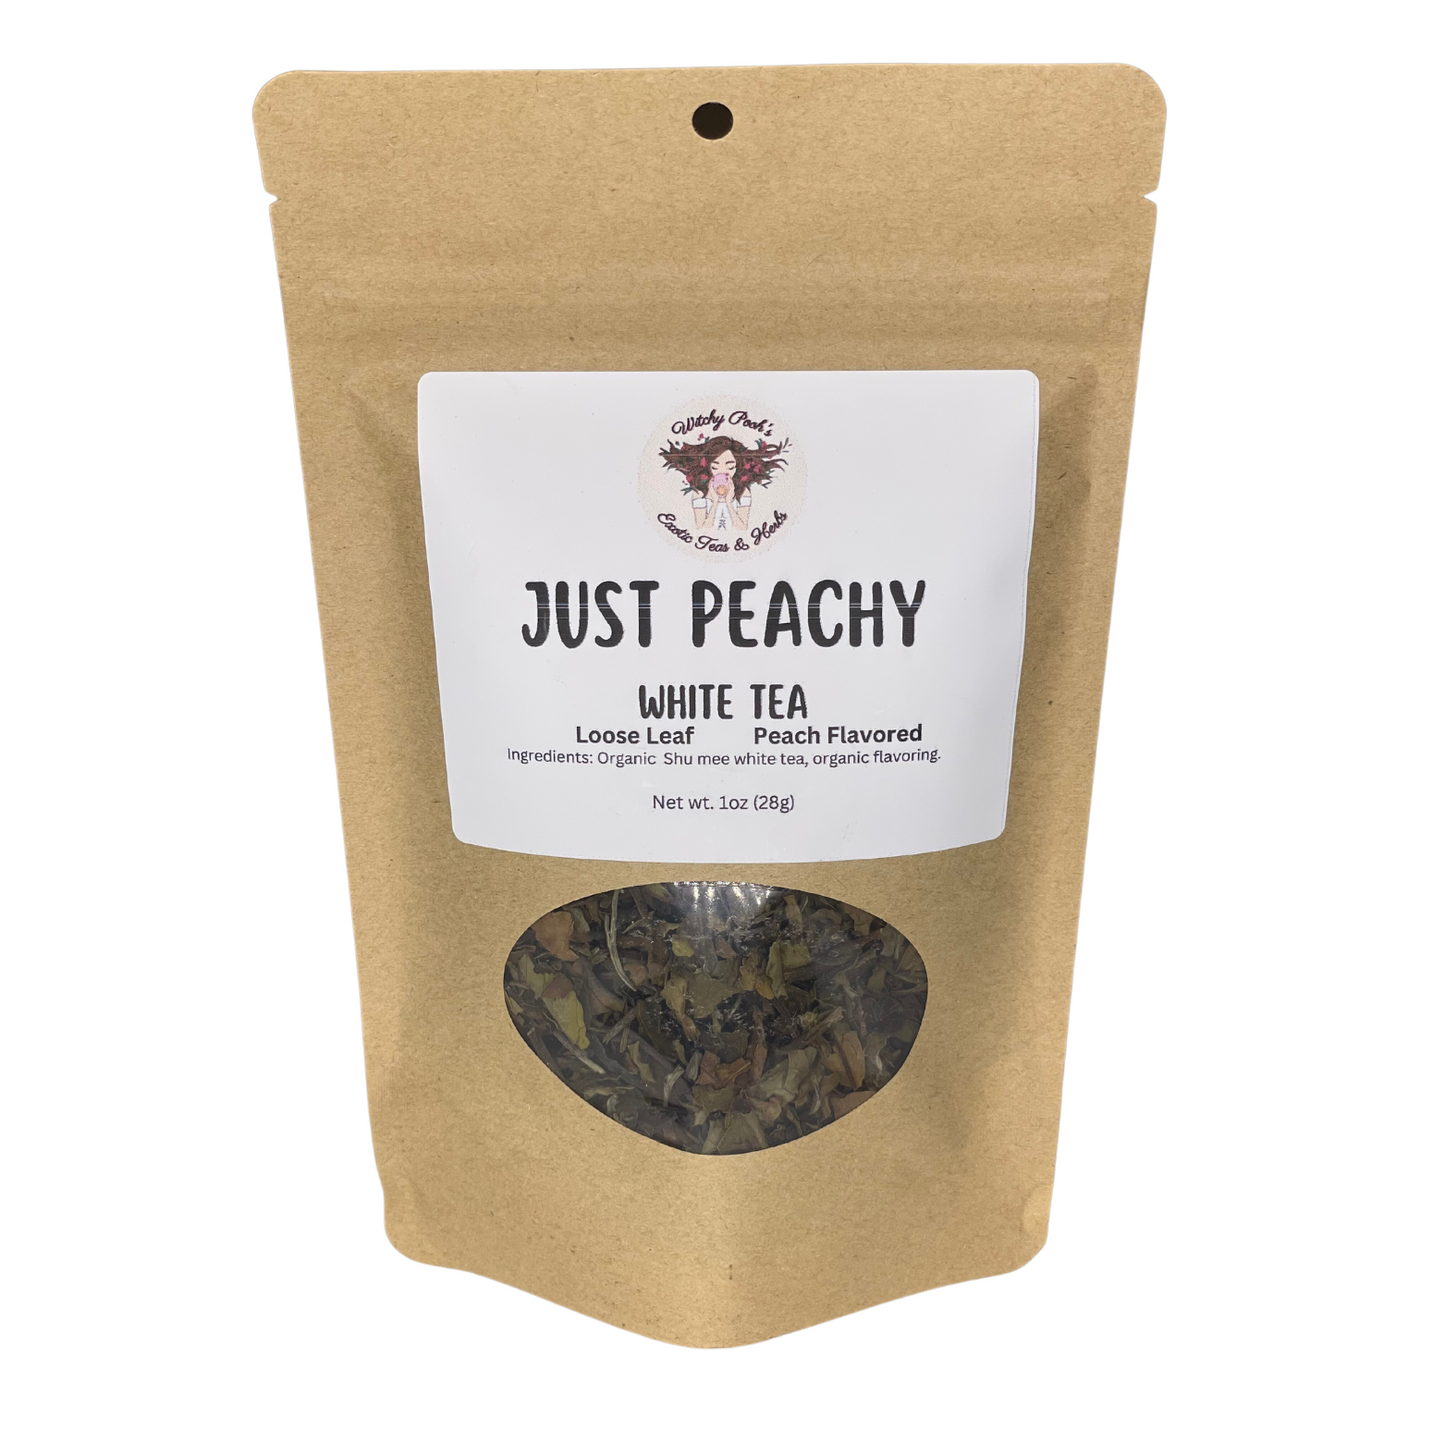 Just Peachy Loose Leaf White Tea, Peach Flavored, Low Caffeine Content